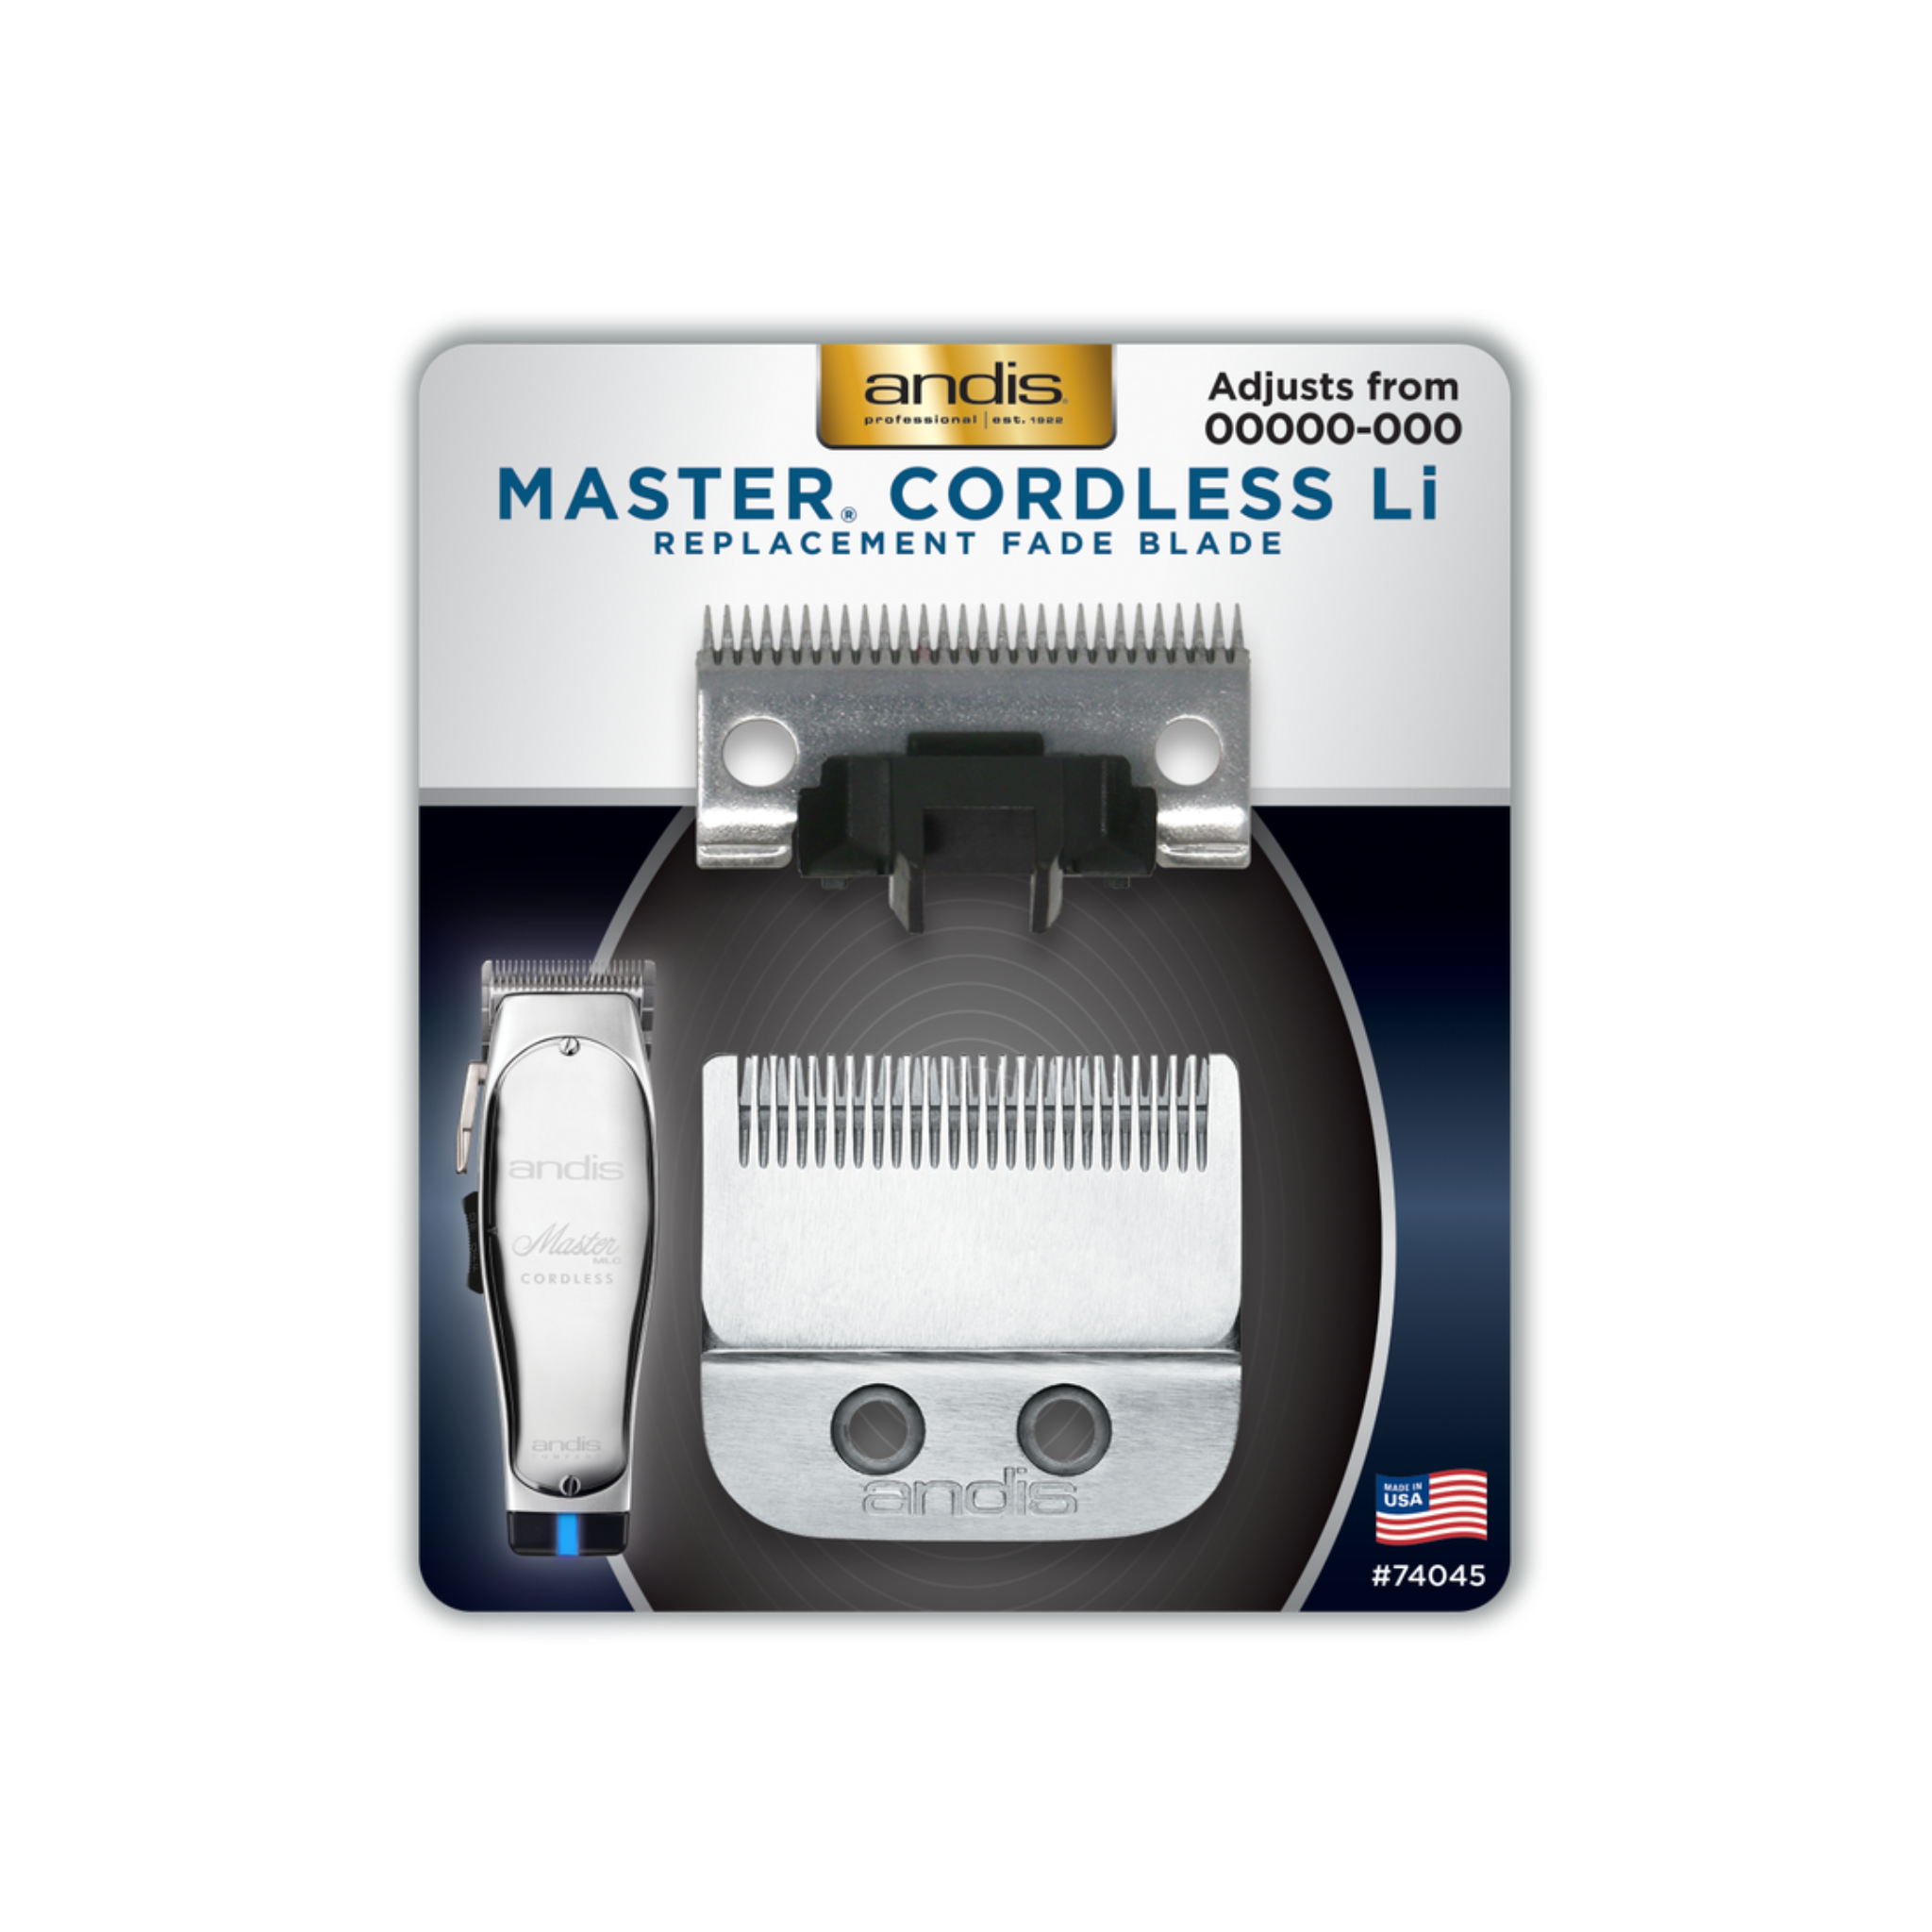 Master Cordless LI - Replacement Fade Blade (Size 00000-000)